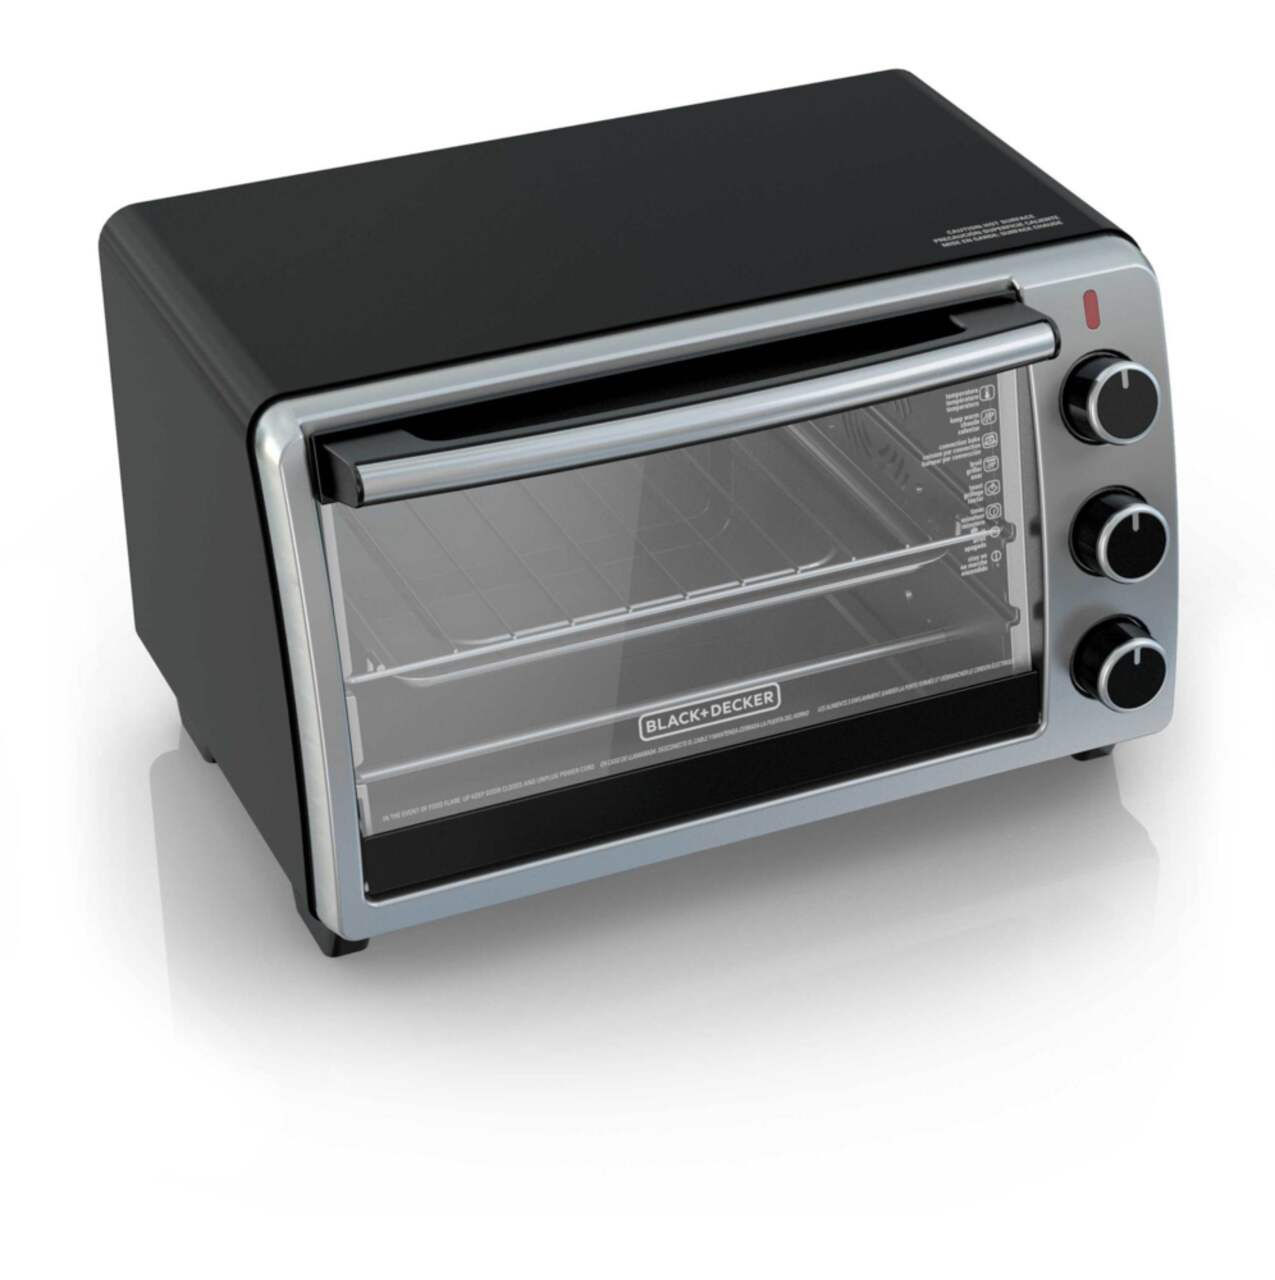 https://media-www.canadiantire.ca/product/living/kitchen/kitchen-appliances/0430851/black-decker-4-slice-convection-toaster-oven-873f14d8-5441-4dcf-a407-a3f43ff23498.png?imdensity=1&imwidth=1244&impolicy=mZoom